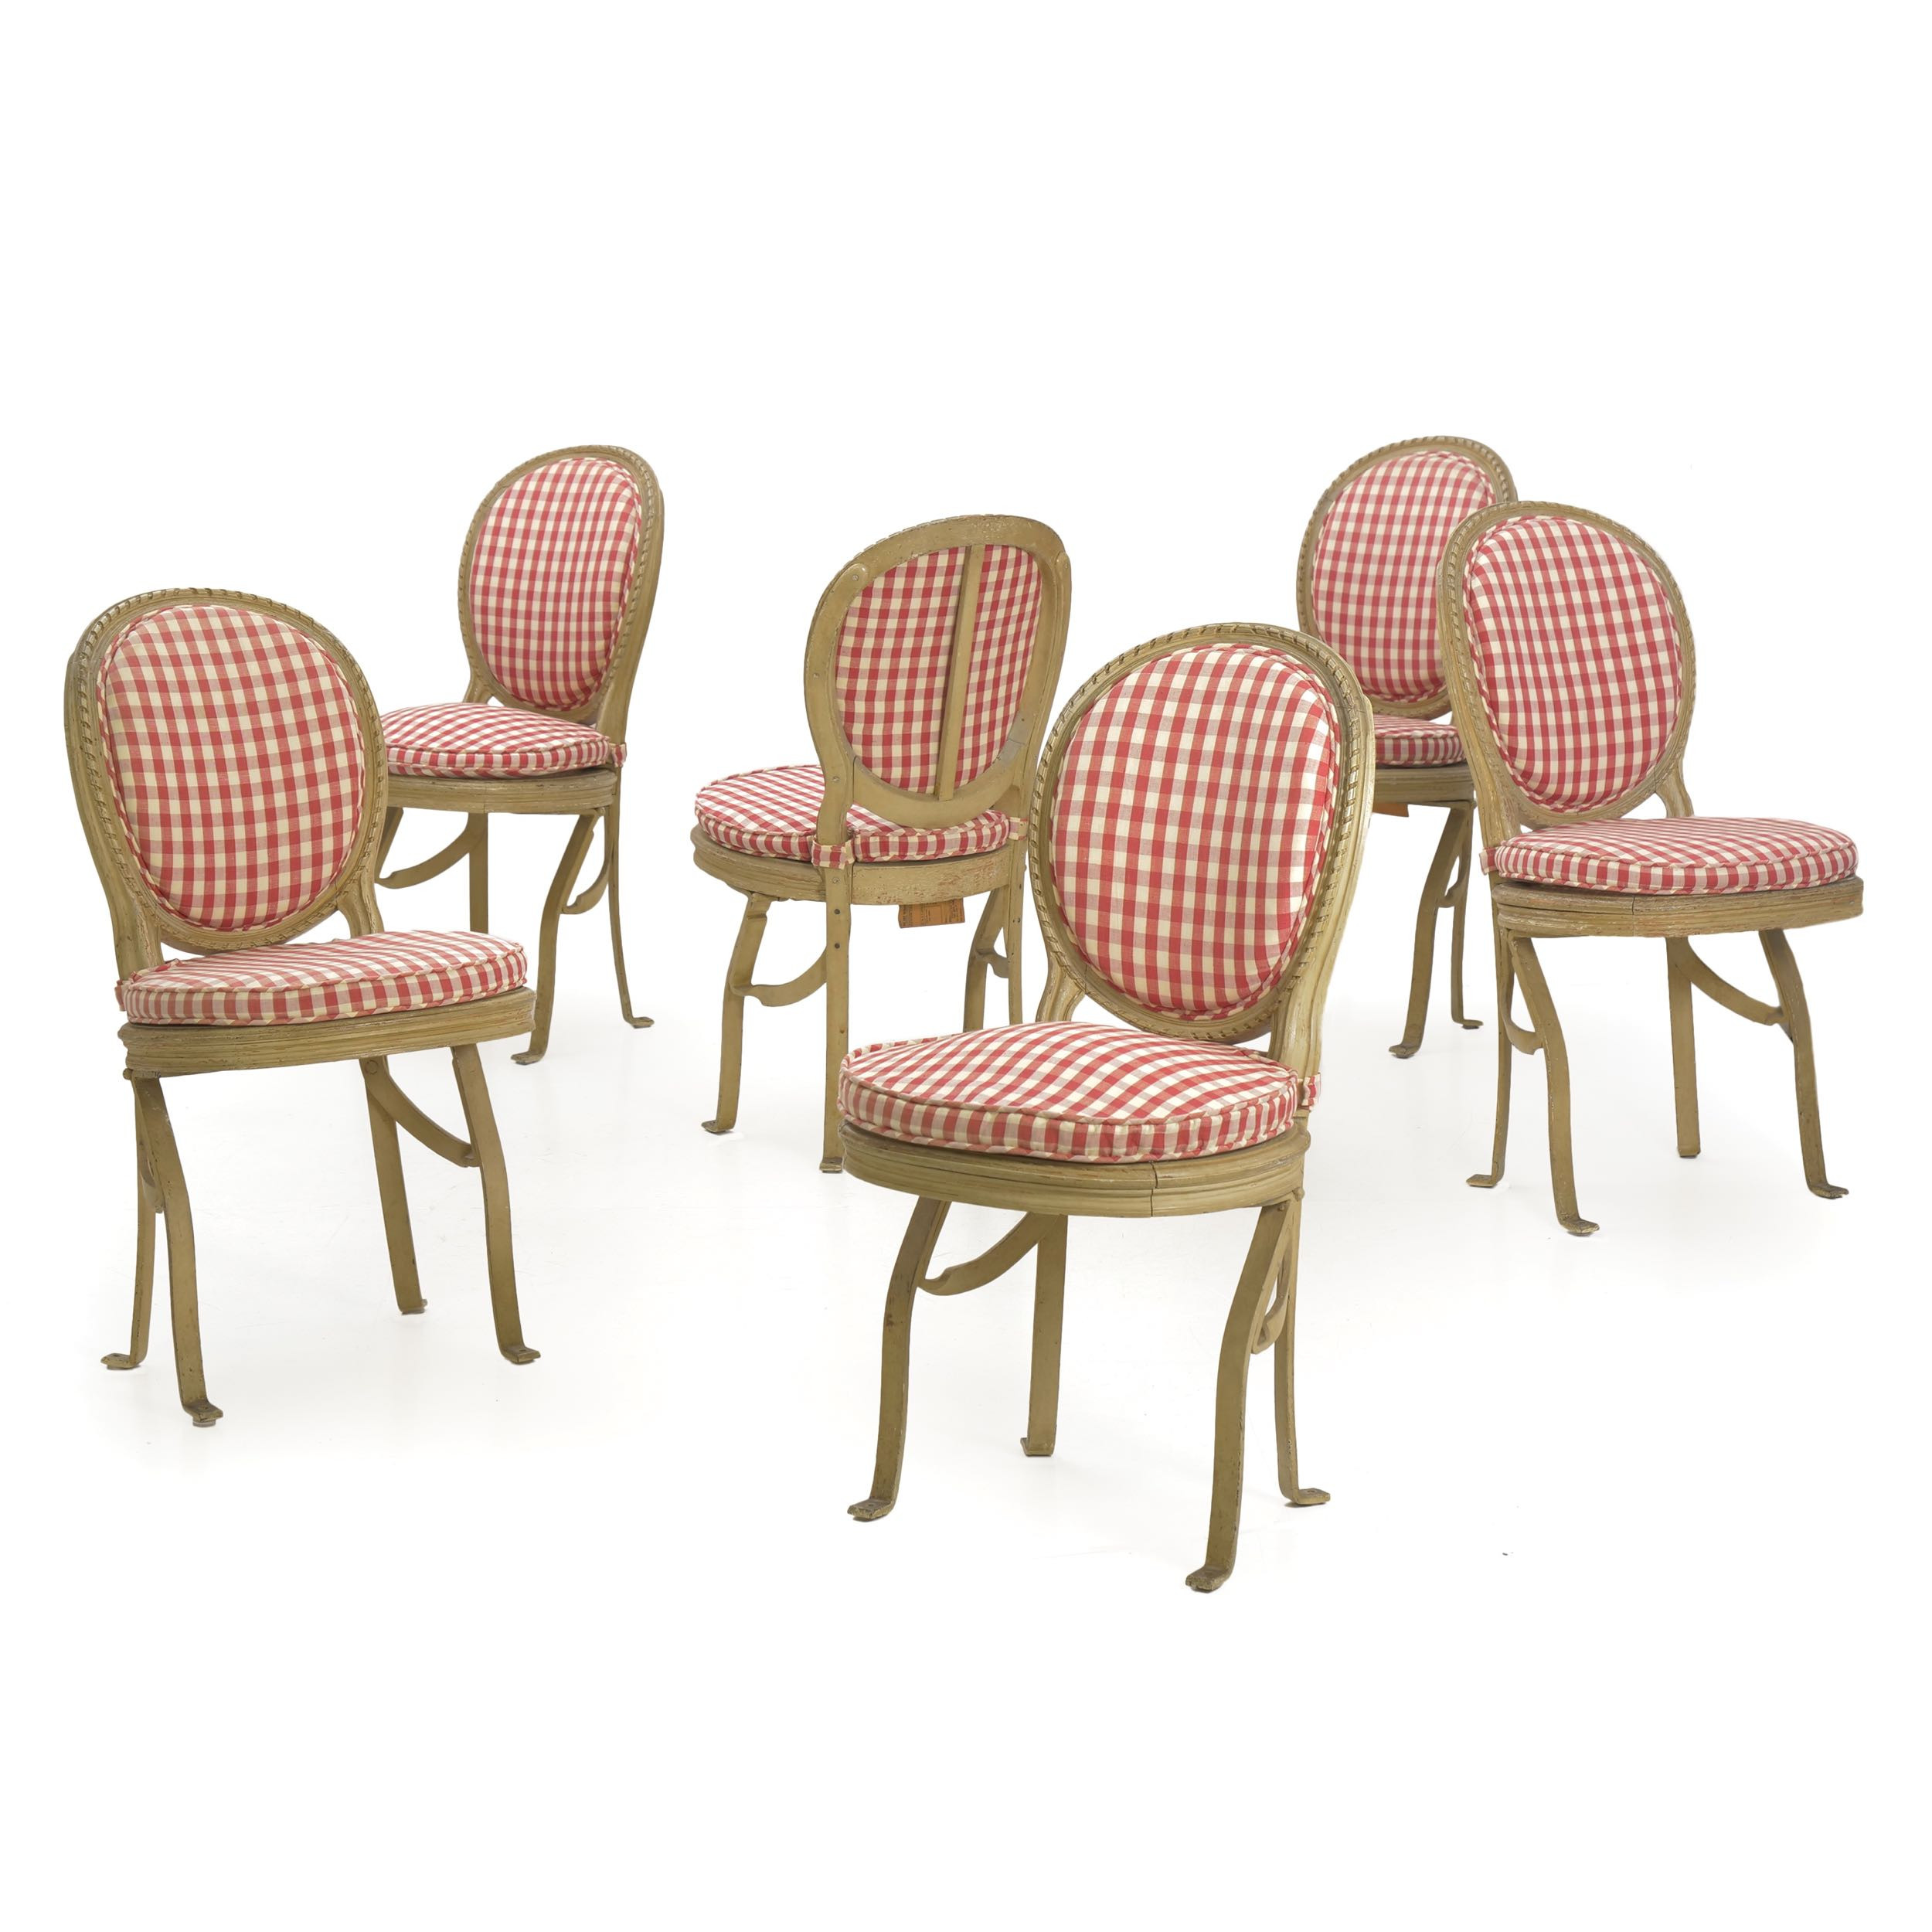 Set of 6 Antique French Louis XVI Painted Dining Chairs incl. 2